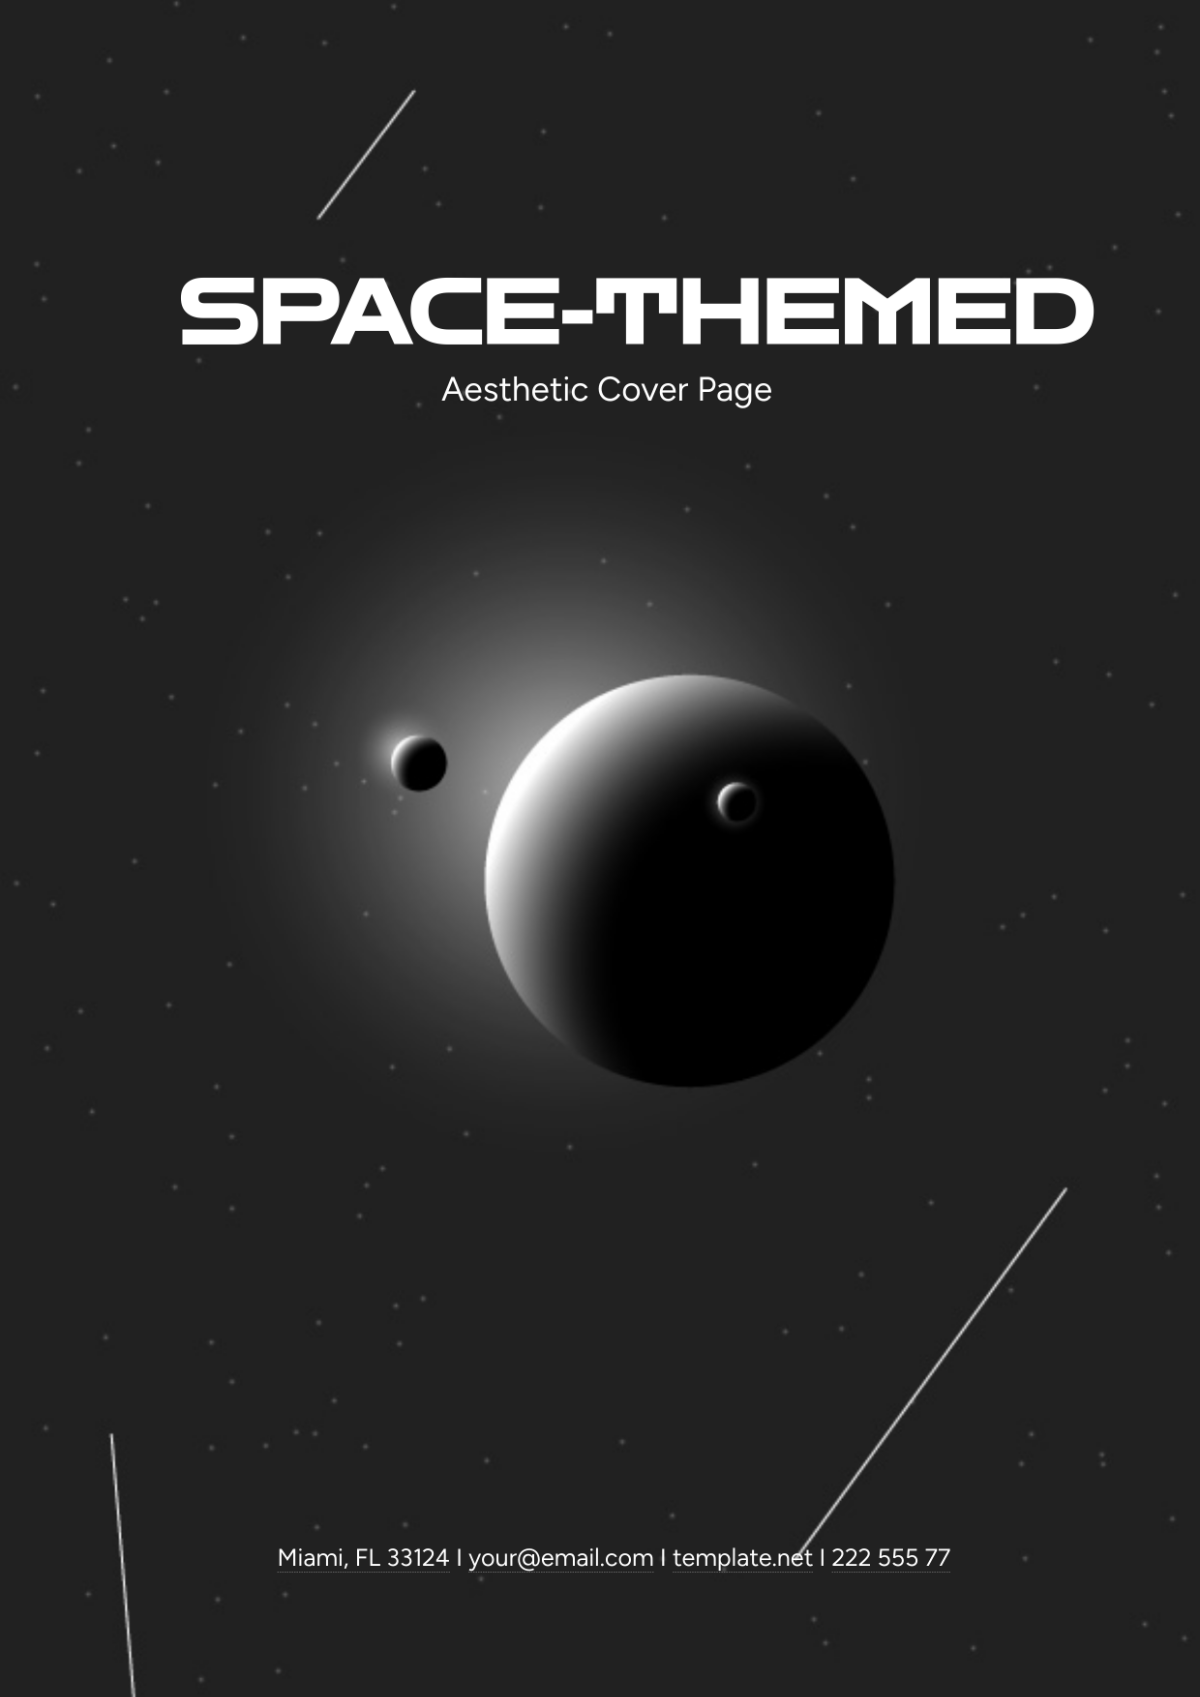 Space-themed Aesthetic Cover Page Template